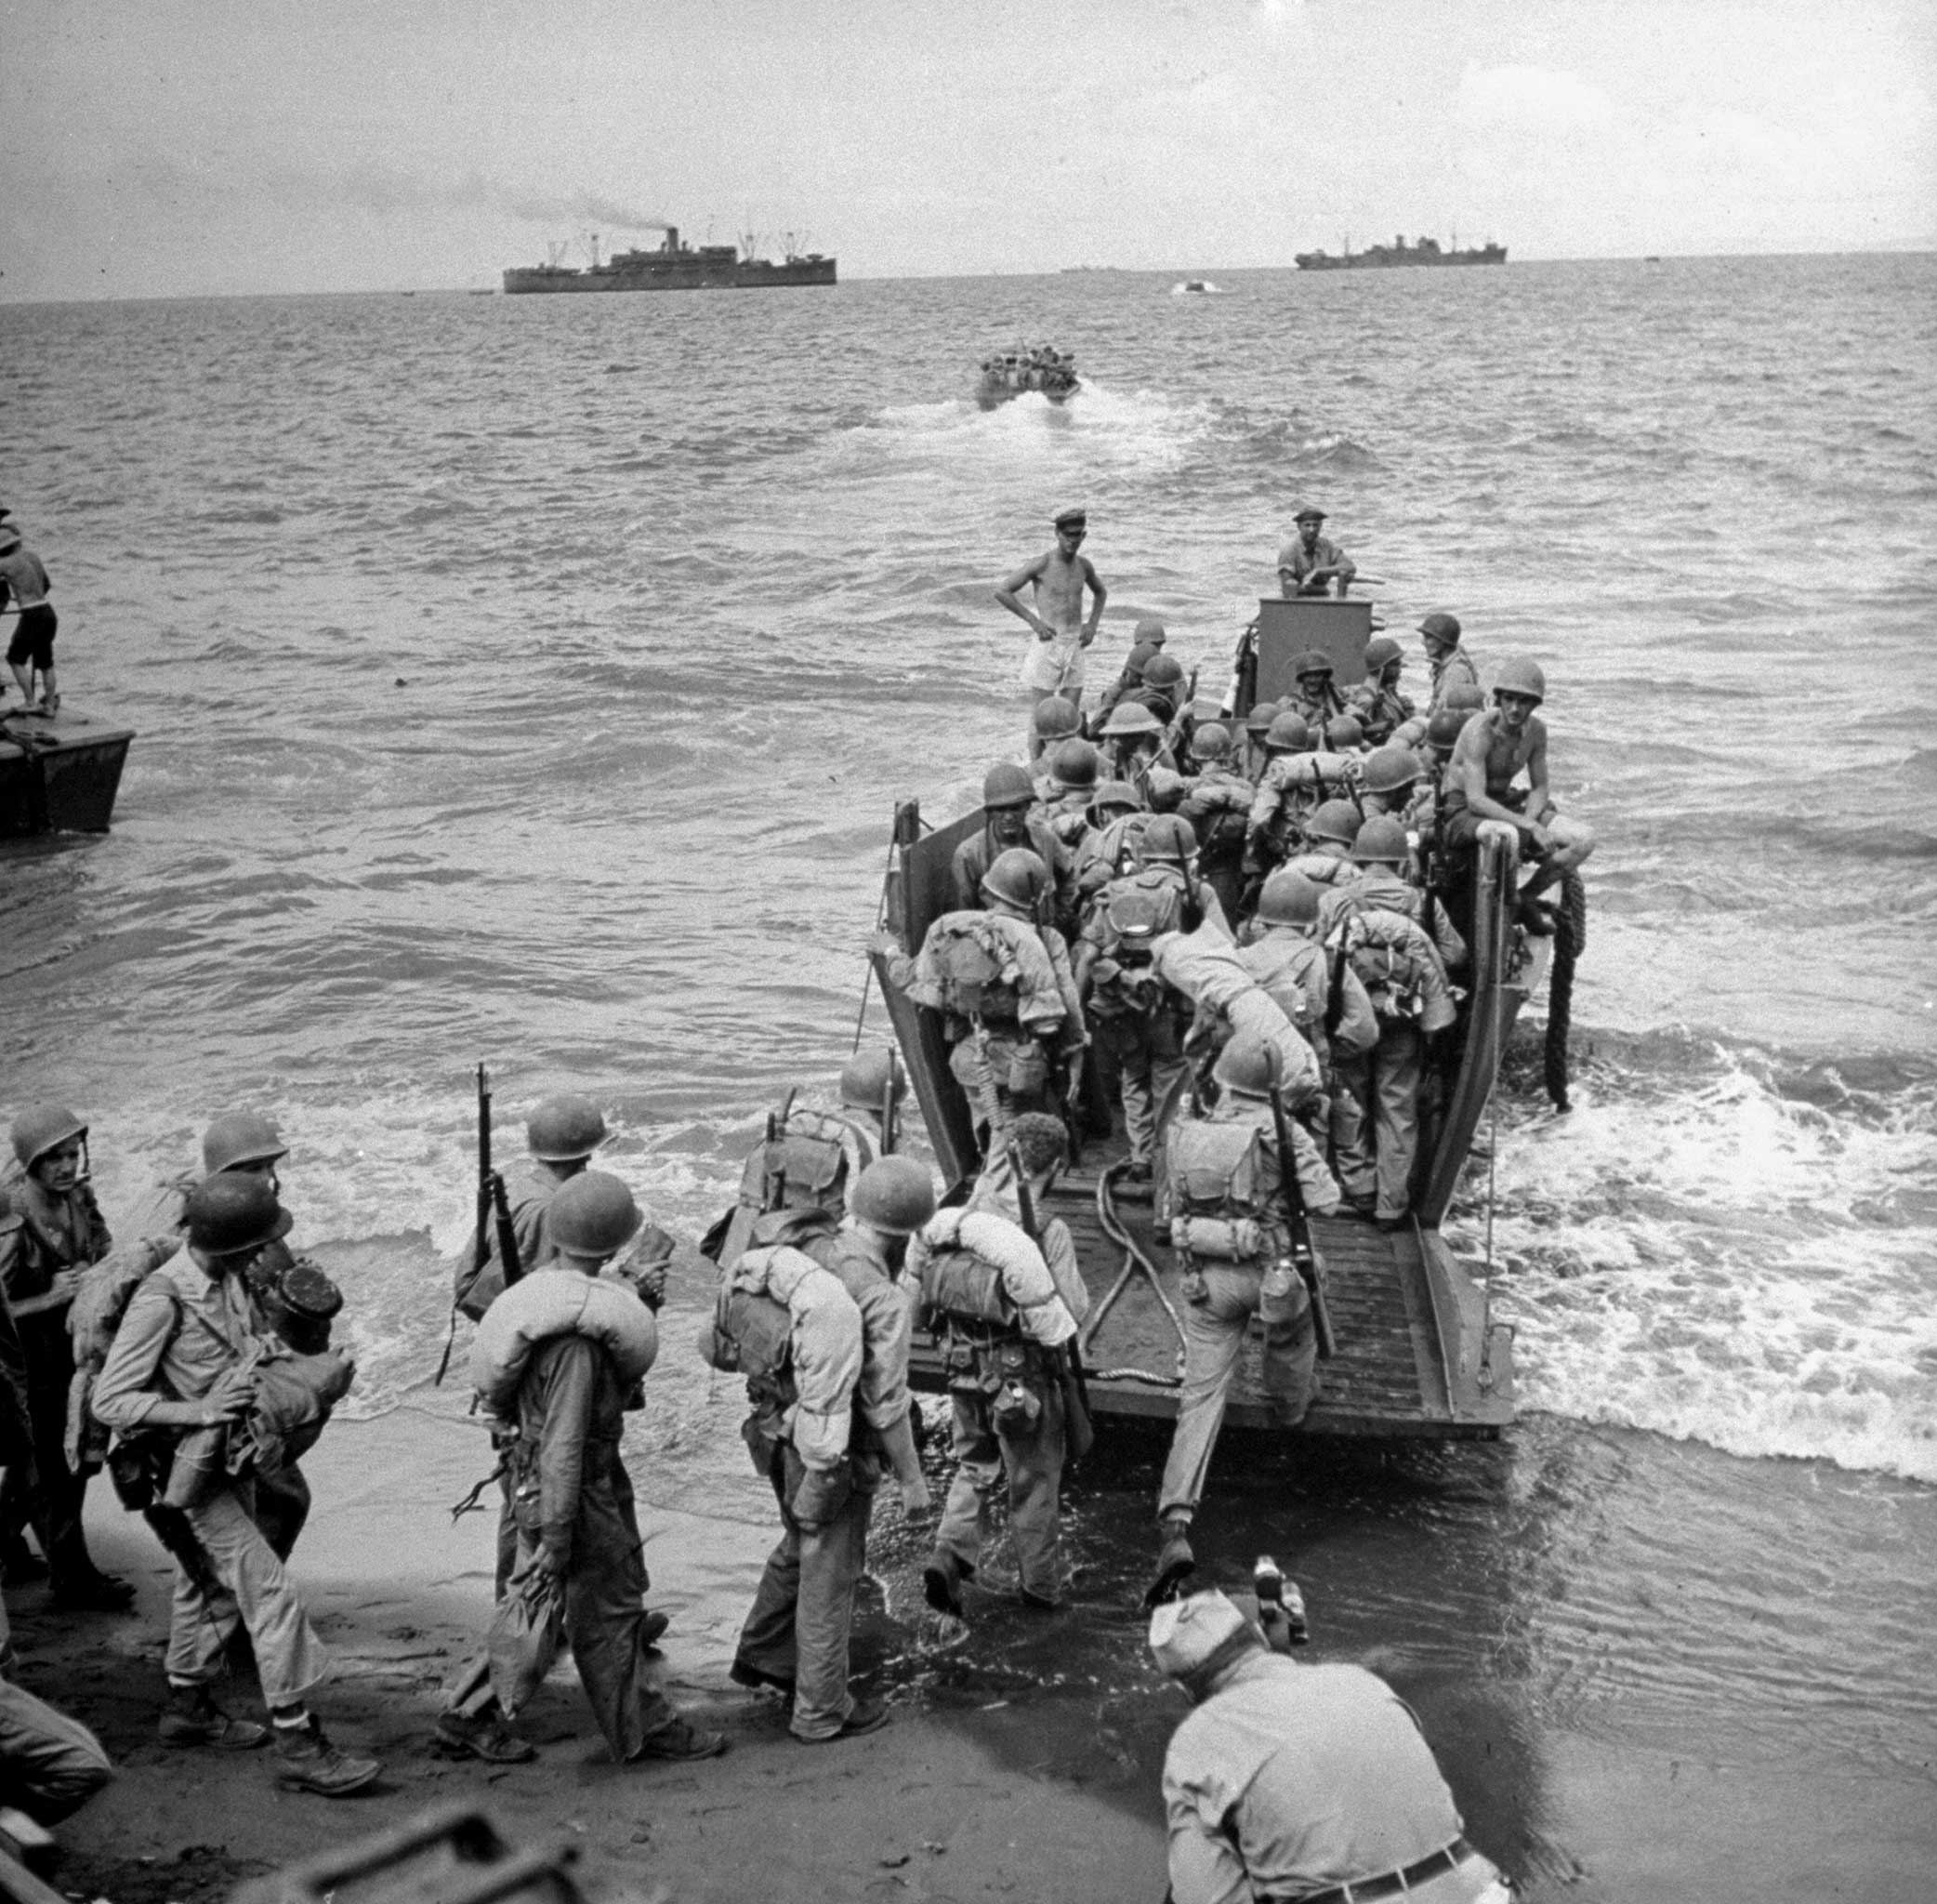 U.S. Marines board a landing craft for a ride to awaiting ships after turning over control of Guadalcanal to Army troops following four months of fighting the Japanese on the island.